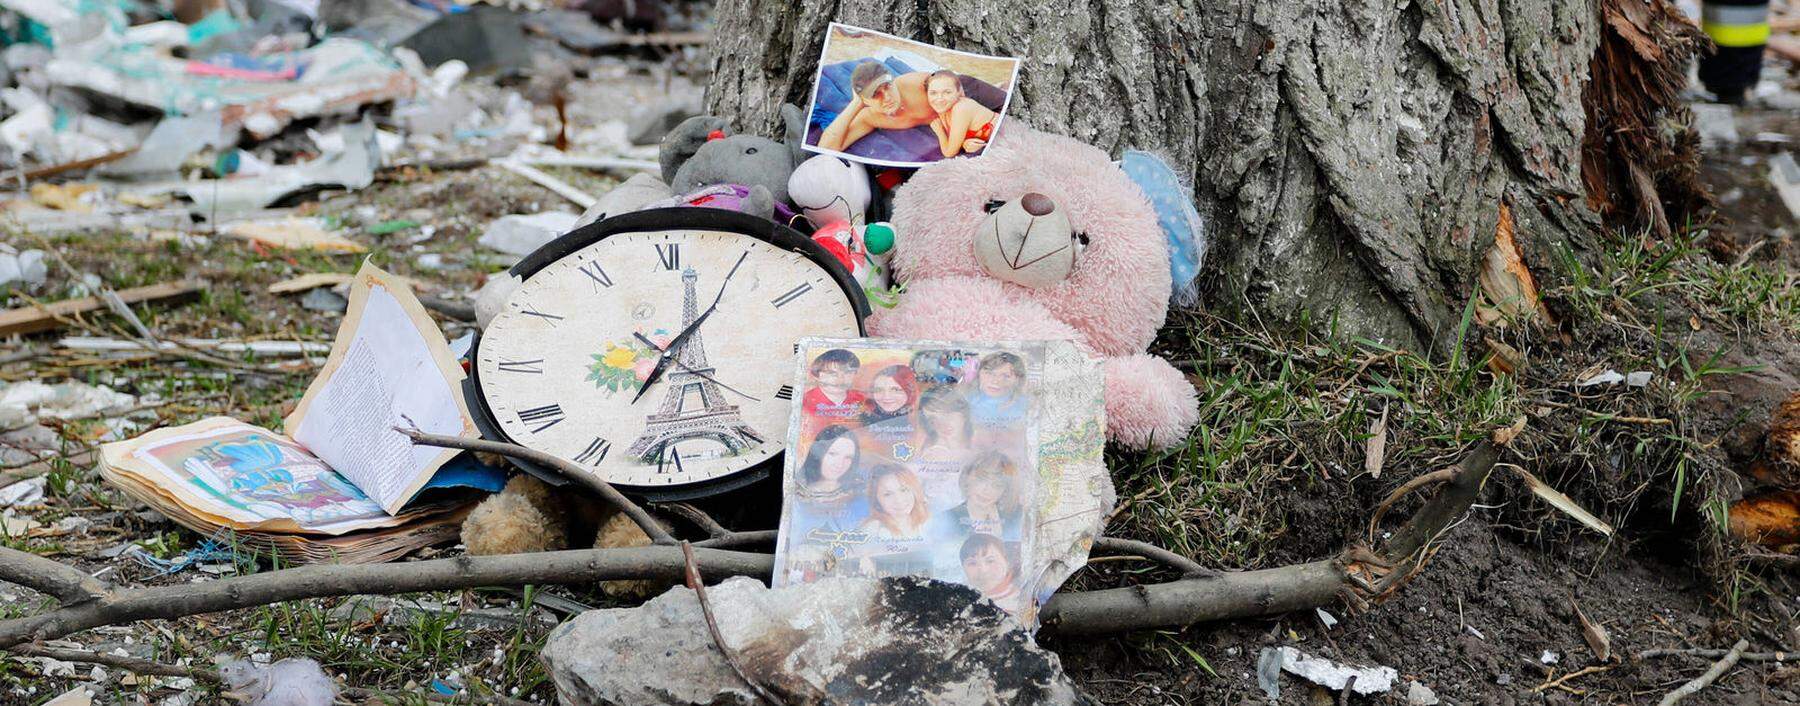 Aftermath Of Russian Attacks On Borodyanka, Ukraine Items such as family photos and a doll are seen near the wreckage o